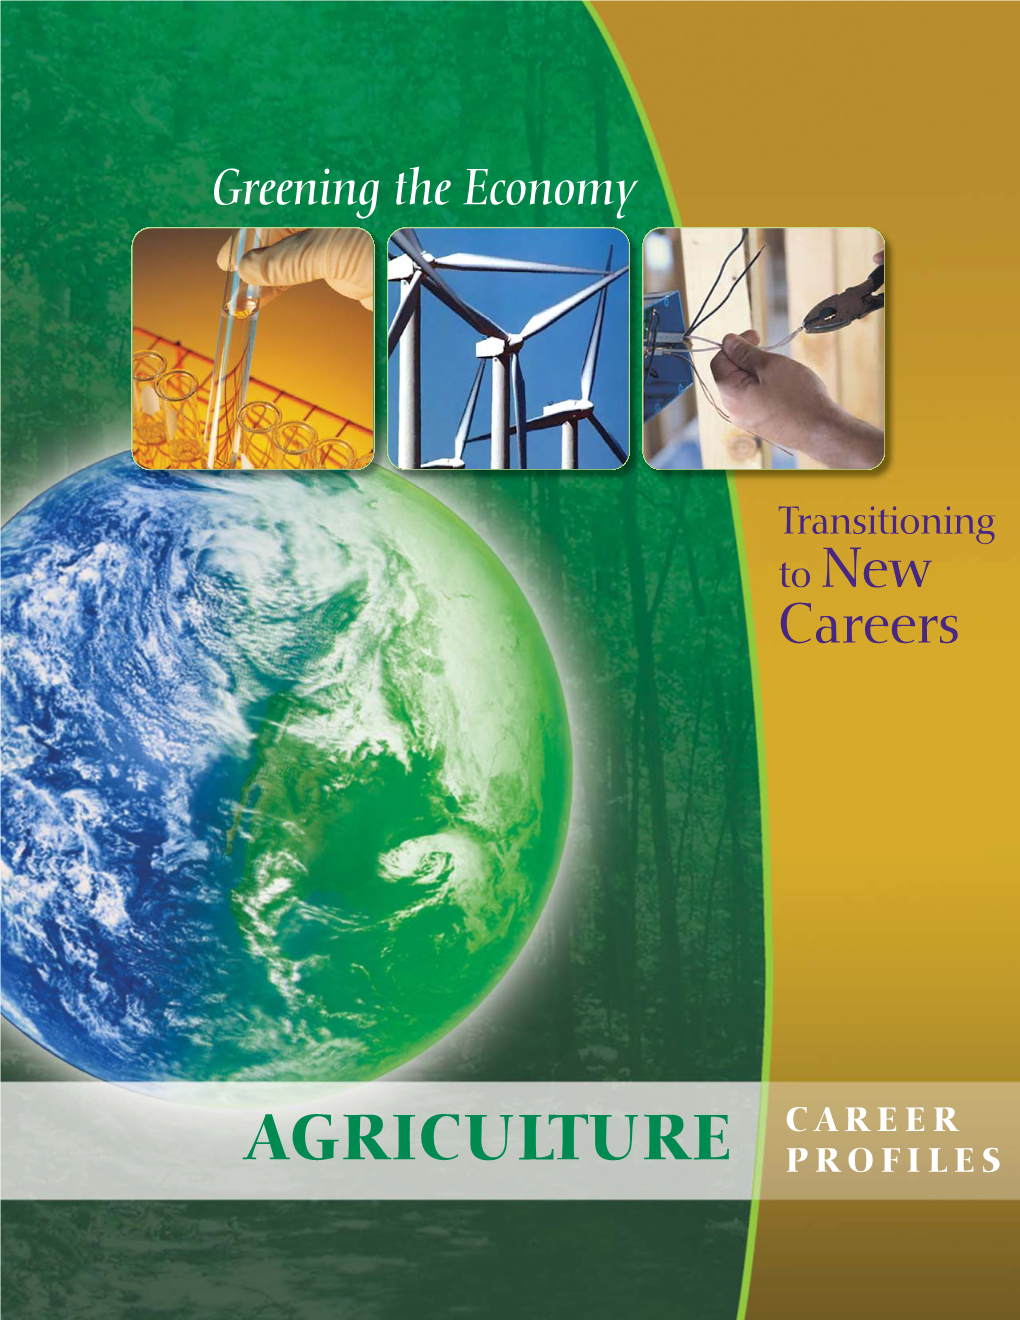 Careers Profiles in Agriculture